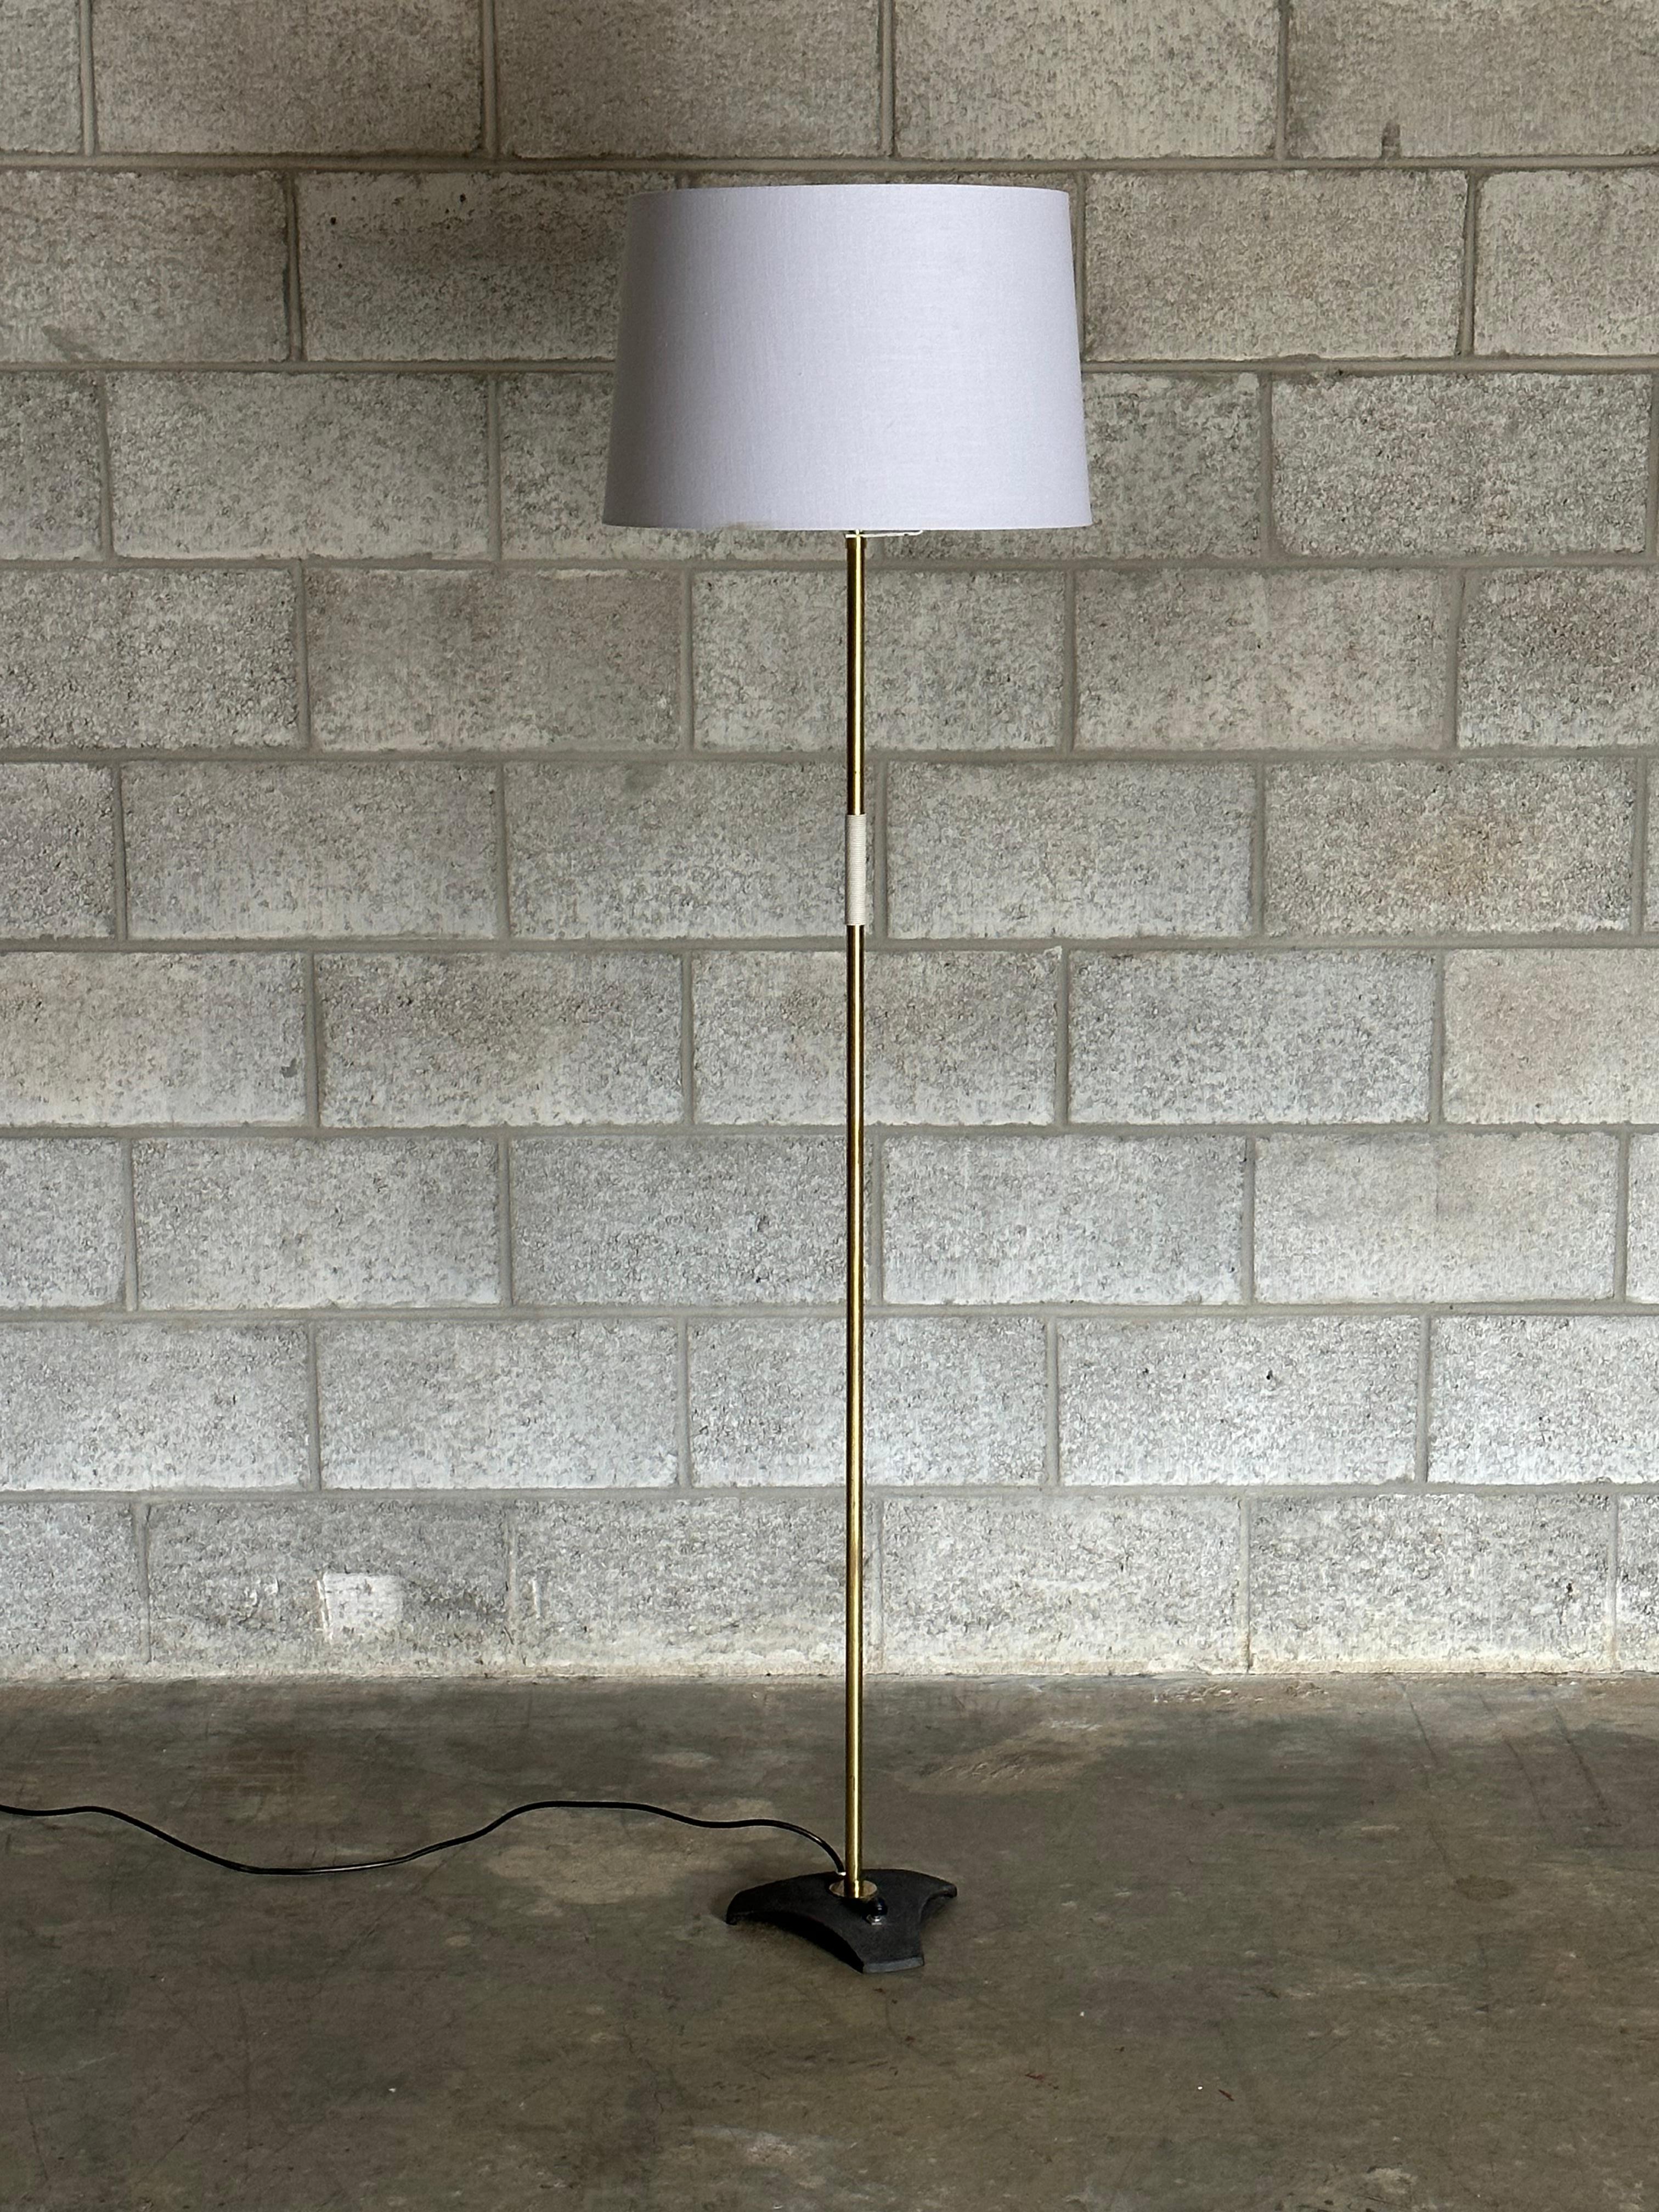 A wonderful minimalist floor lamp by Rupert Nikoll. Features a cast iron base with thin brass plated tubing, a section wrapped in, what appears to be, nylon, and finally a classic shade. Great minimalist form, with a push through socket and a foot